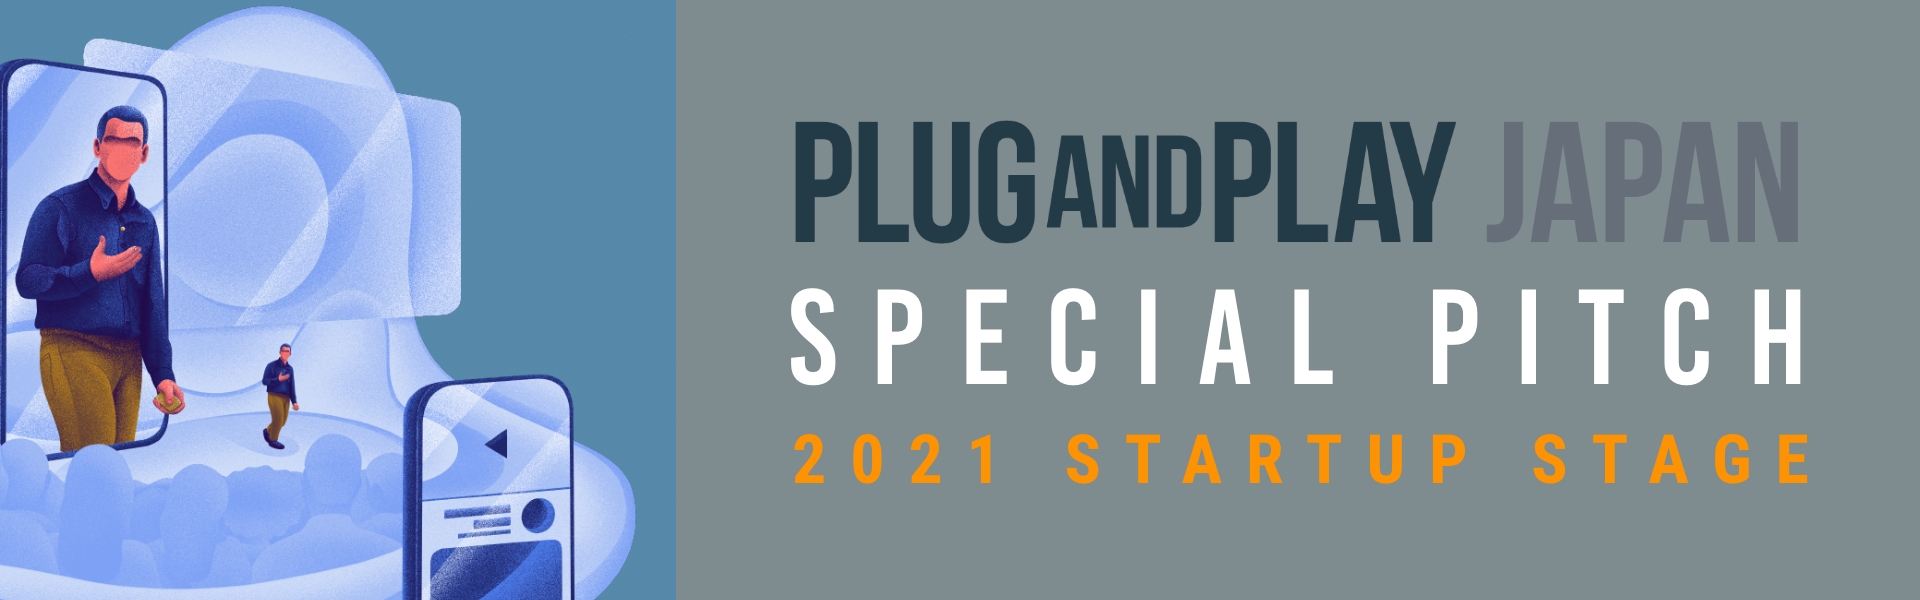 Plug and Play Special Pitch